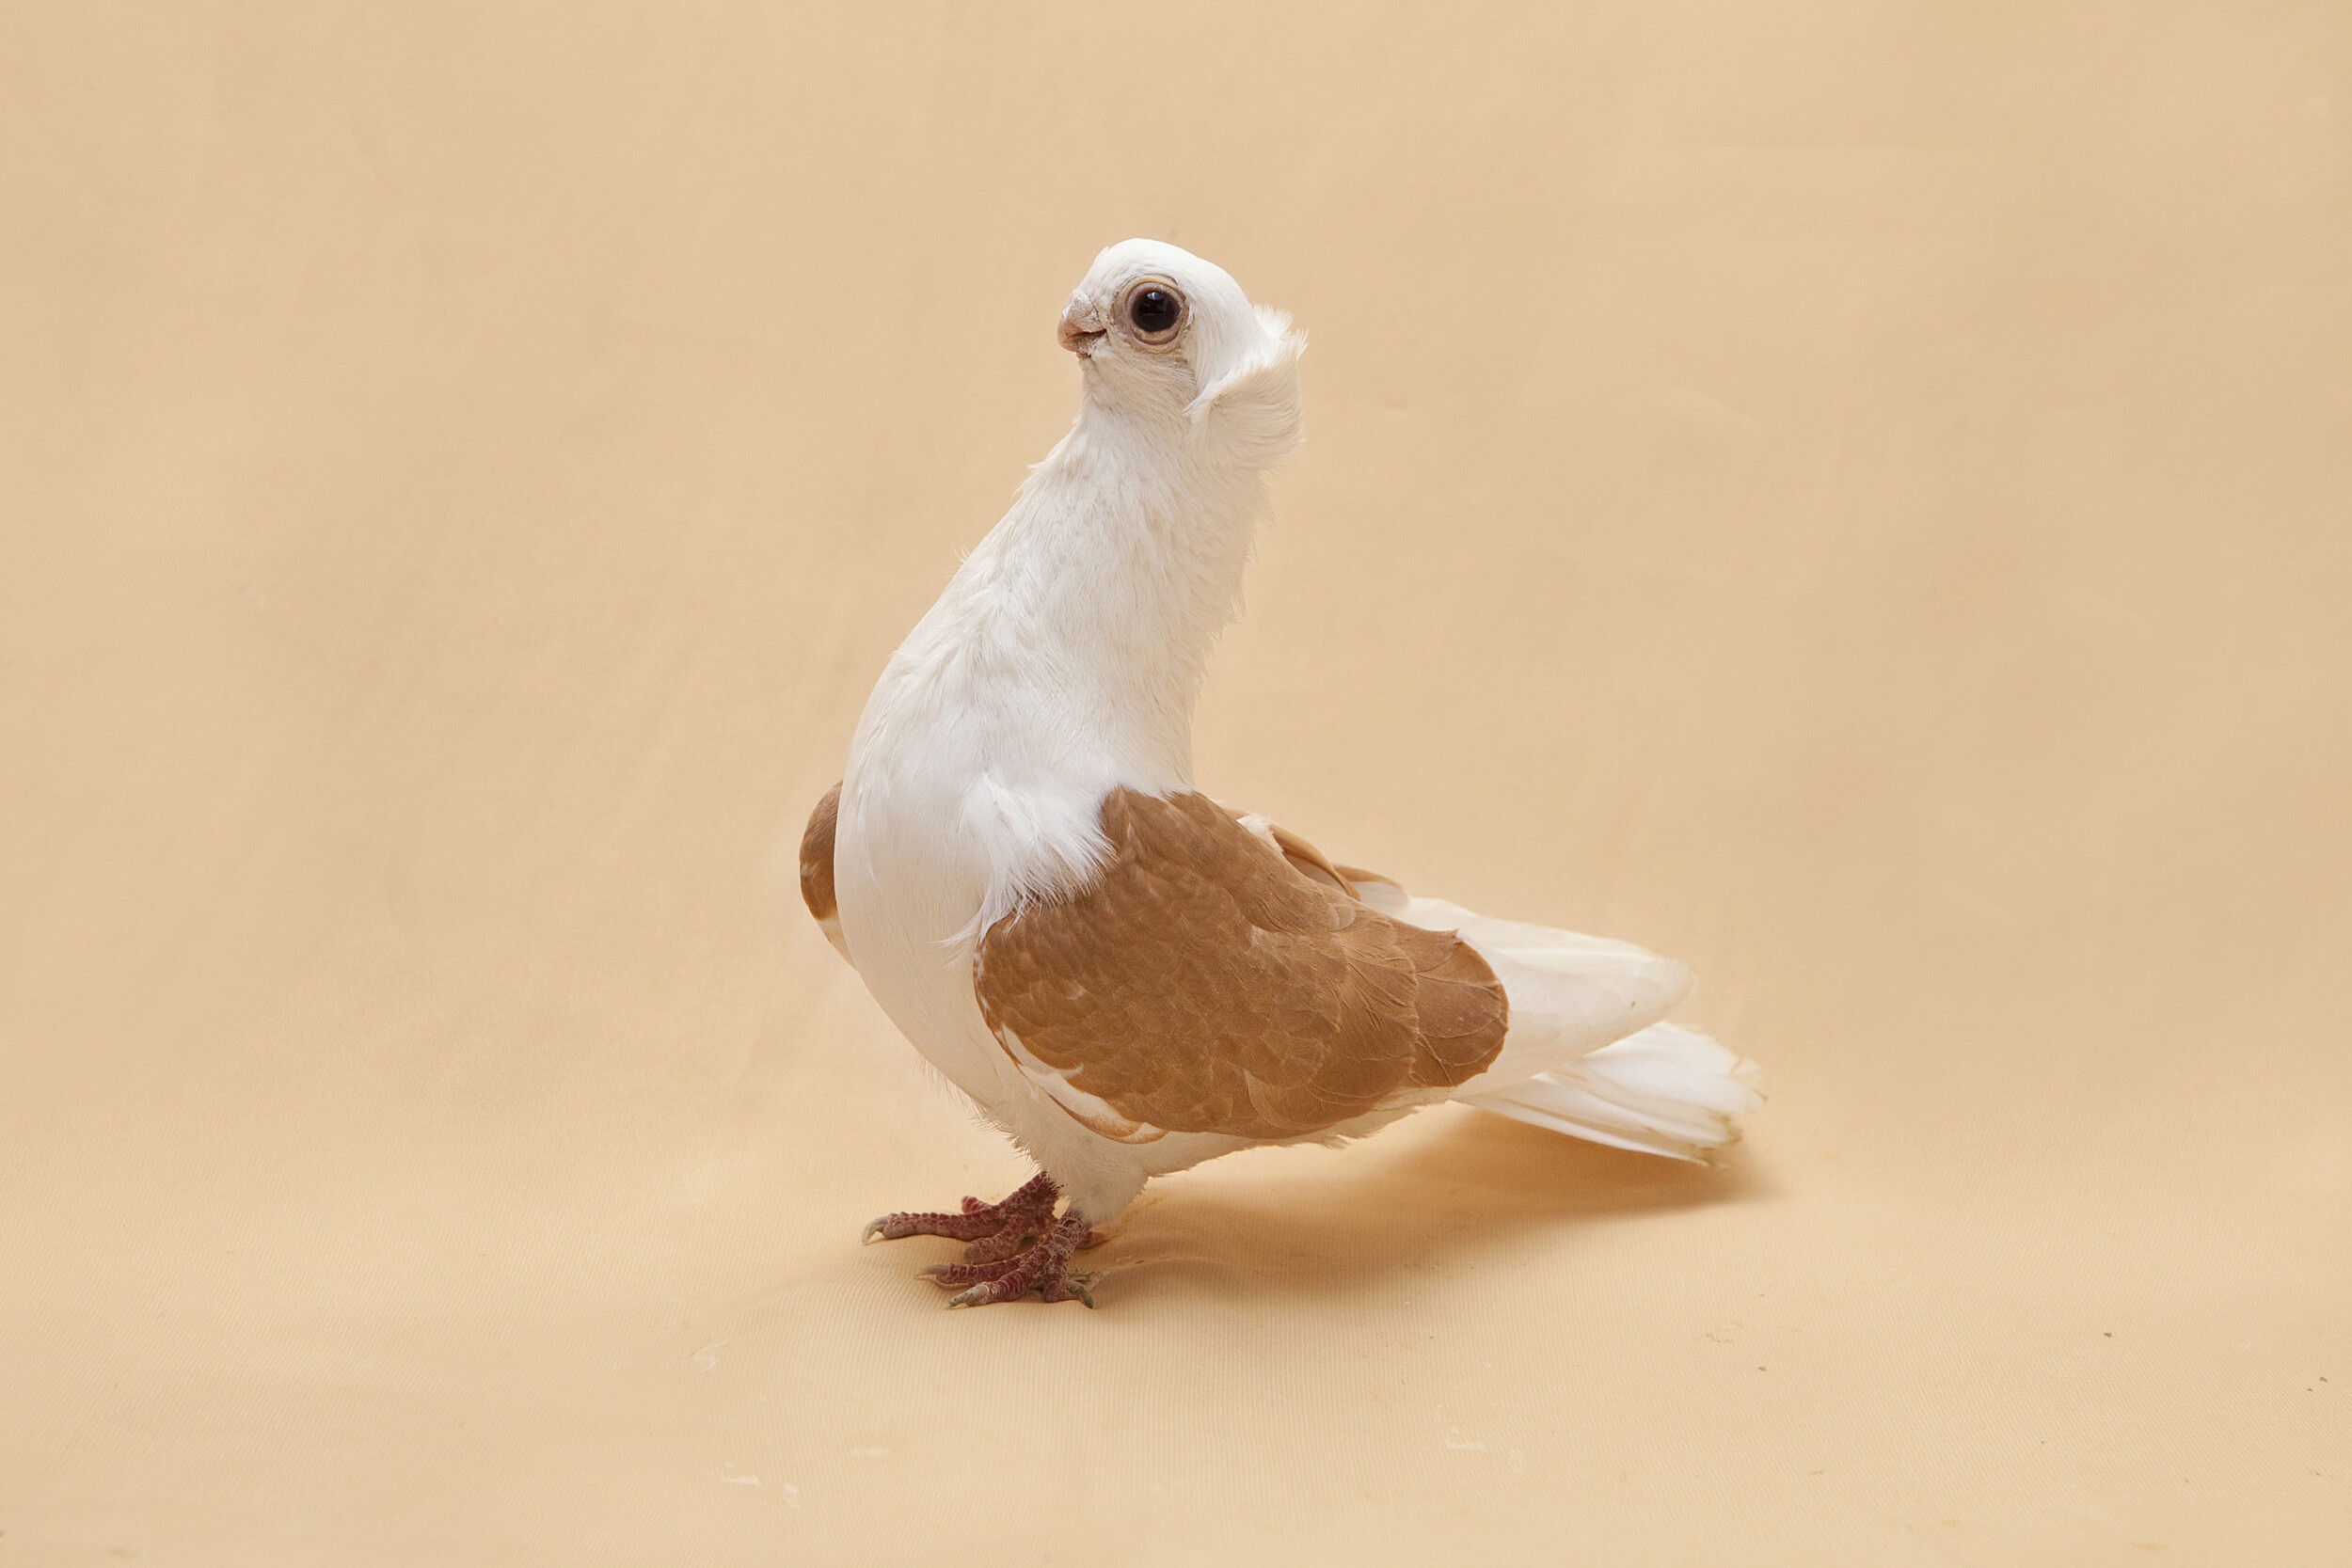 The Polish Owl is actually one of 52 breeds of Polish pigeons and is closely related to the Budapest Short Face. They are bred to be as small as possible and have a very precise posture, when taken to competitions they are scored based on how close they are to a recognized standard.